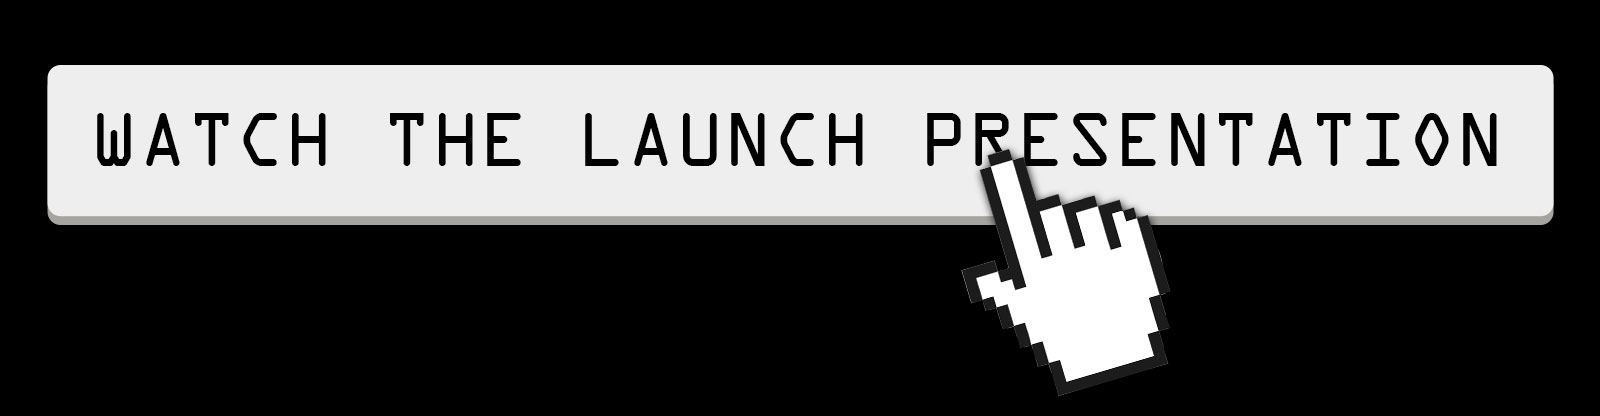 Watch the Launch Presentation